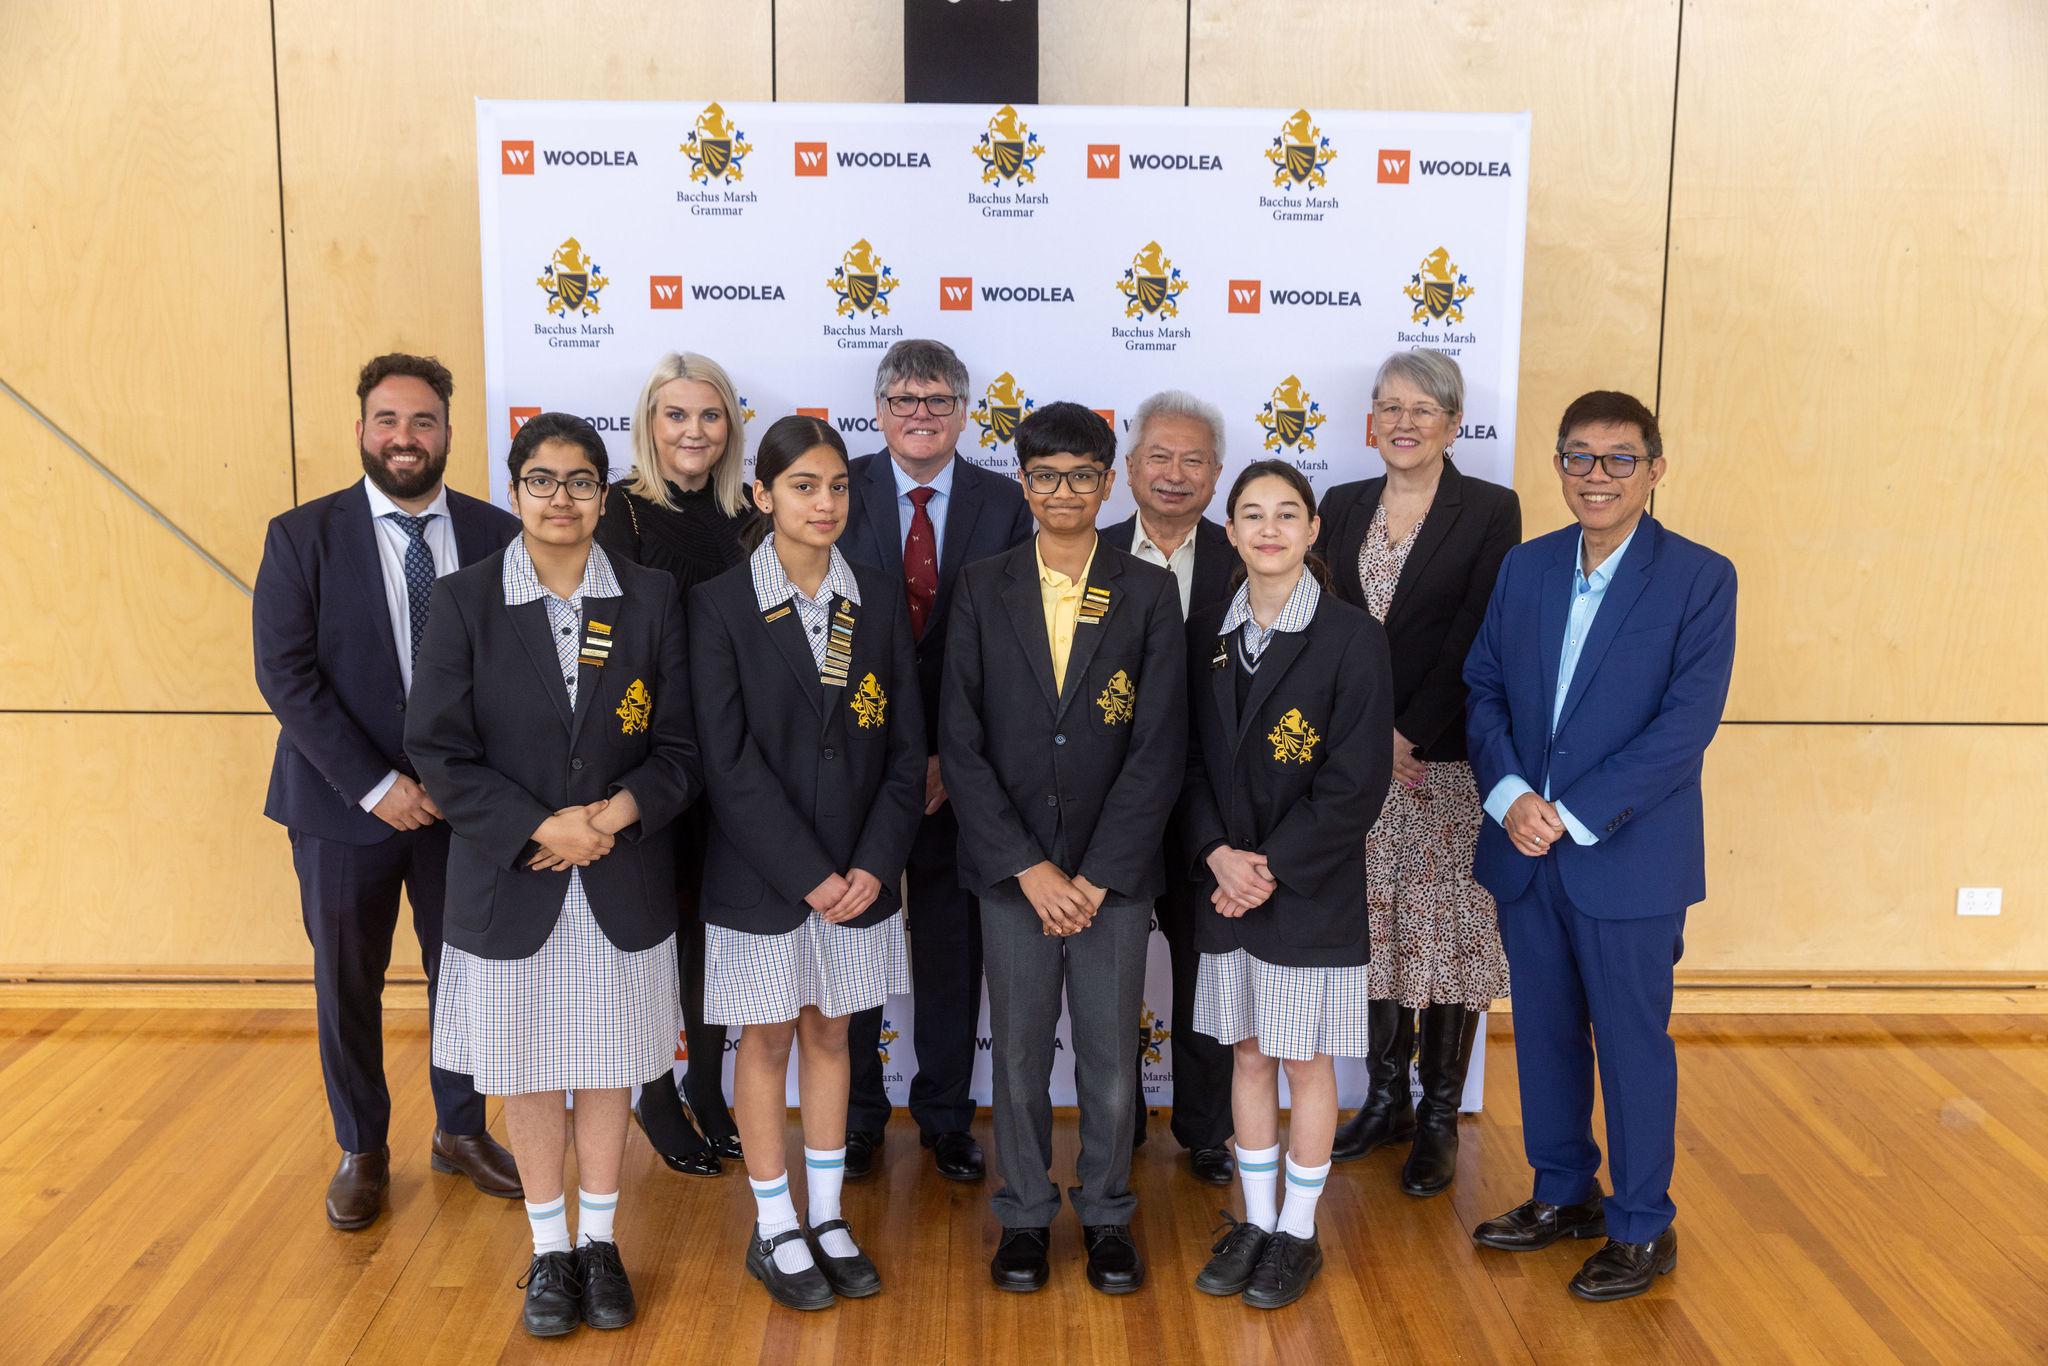 Bacchus Marsh Grammar announces expansion to year 12